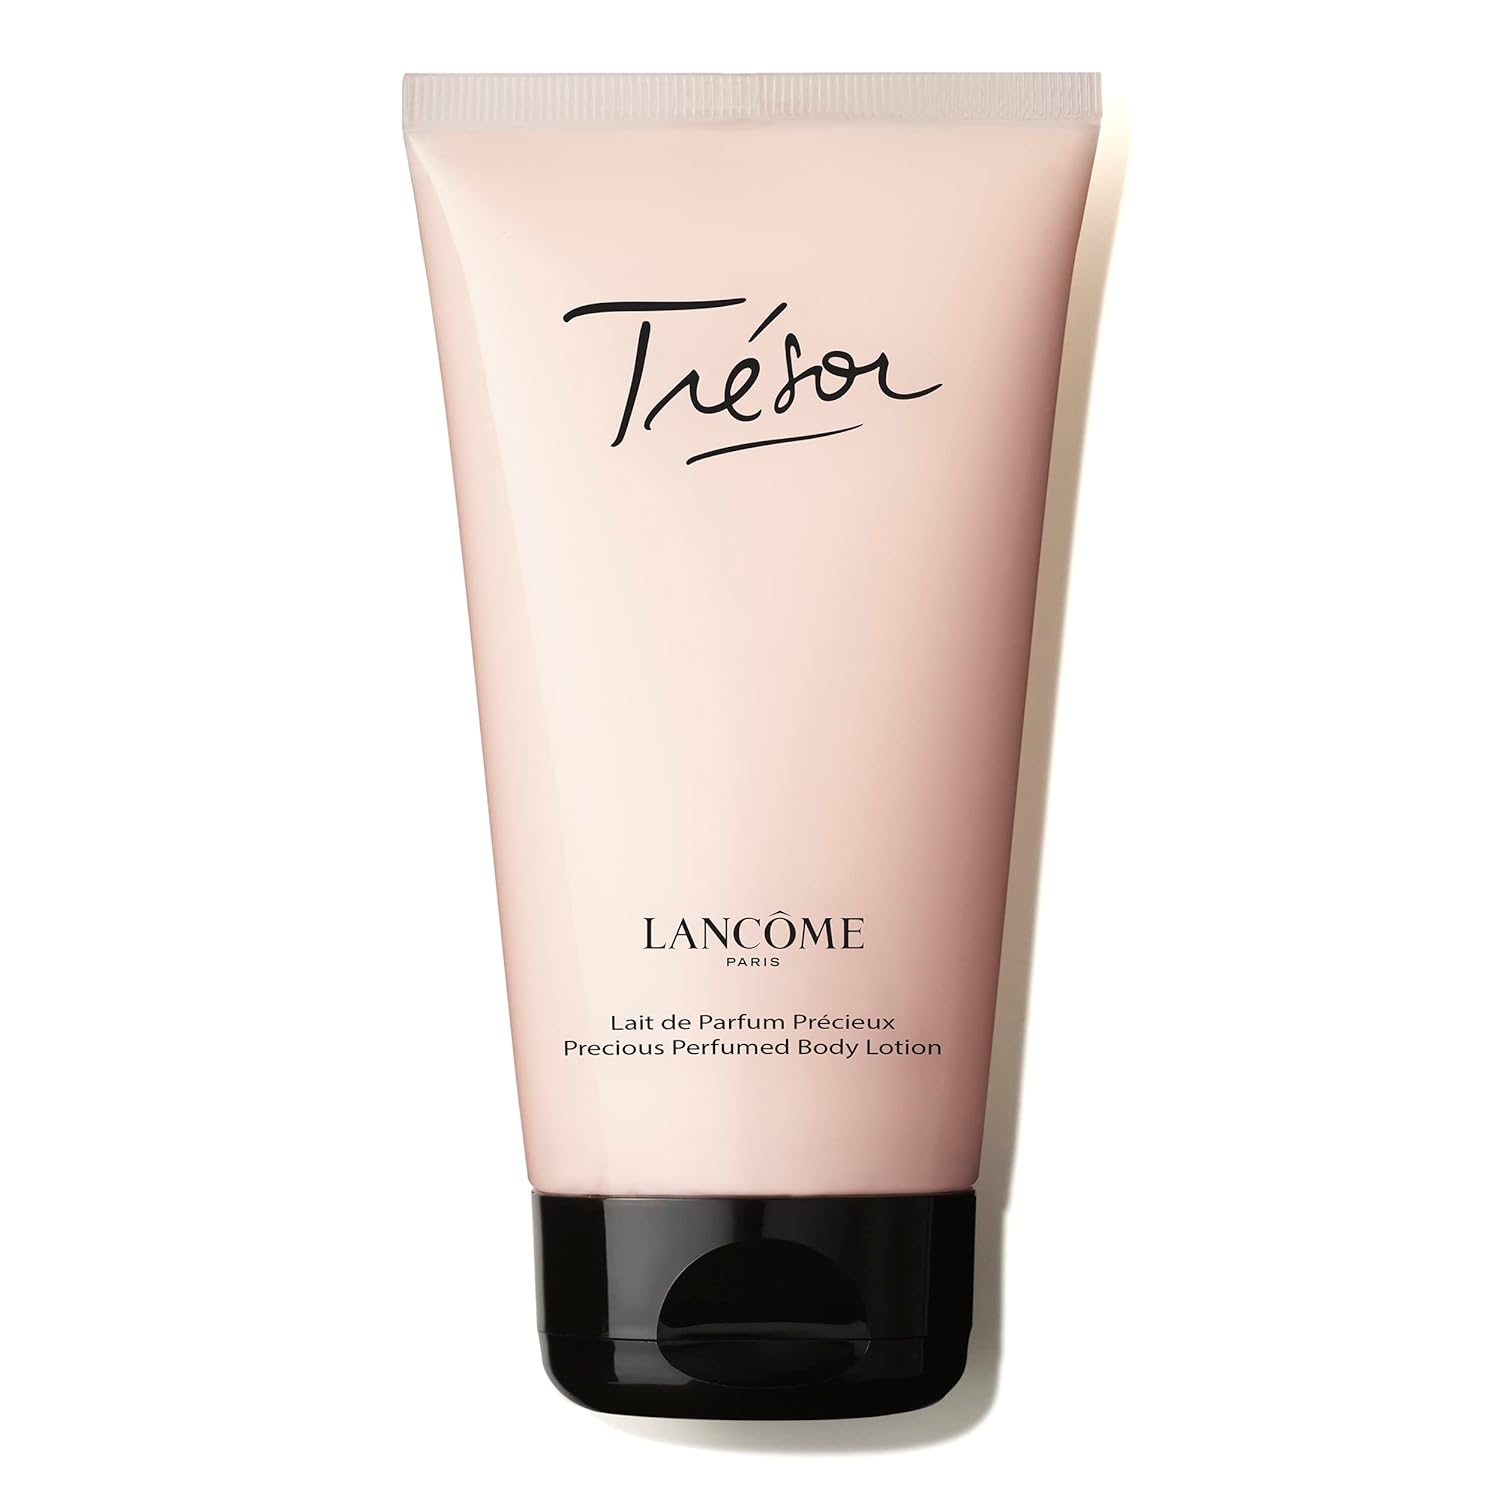 Lancôme Trésor Scented Body Lotion - Smoothes, Illuminates & Hydrates Skin - With Rose, Lilac & Apricot Blossom - 5 Fl Oz